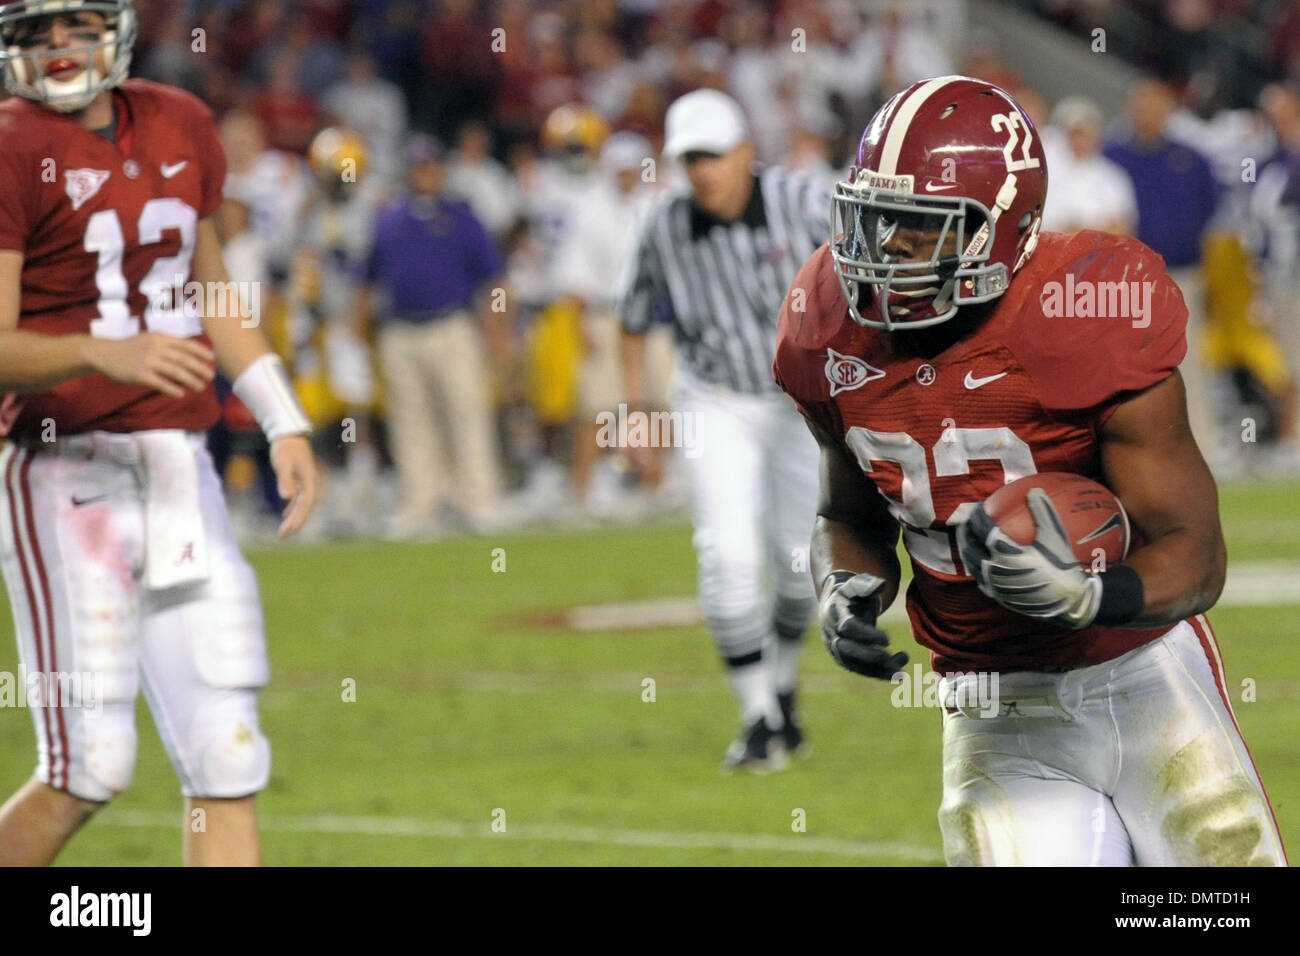 Alabama running back, #22 Mark Ingram, during an SEC West matchup between #3 Alabama and #9 LSU.  The game is being held in Bryant .Denny Stadium in Tuscaloosa, Alabama.  Alabama would win the game 24-15. (Credit Image: © Stacy Revere/Southcreek Global/ZUMApress.com) Stock Photo